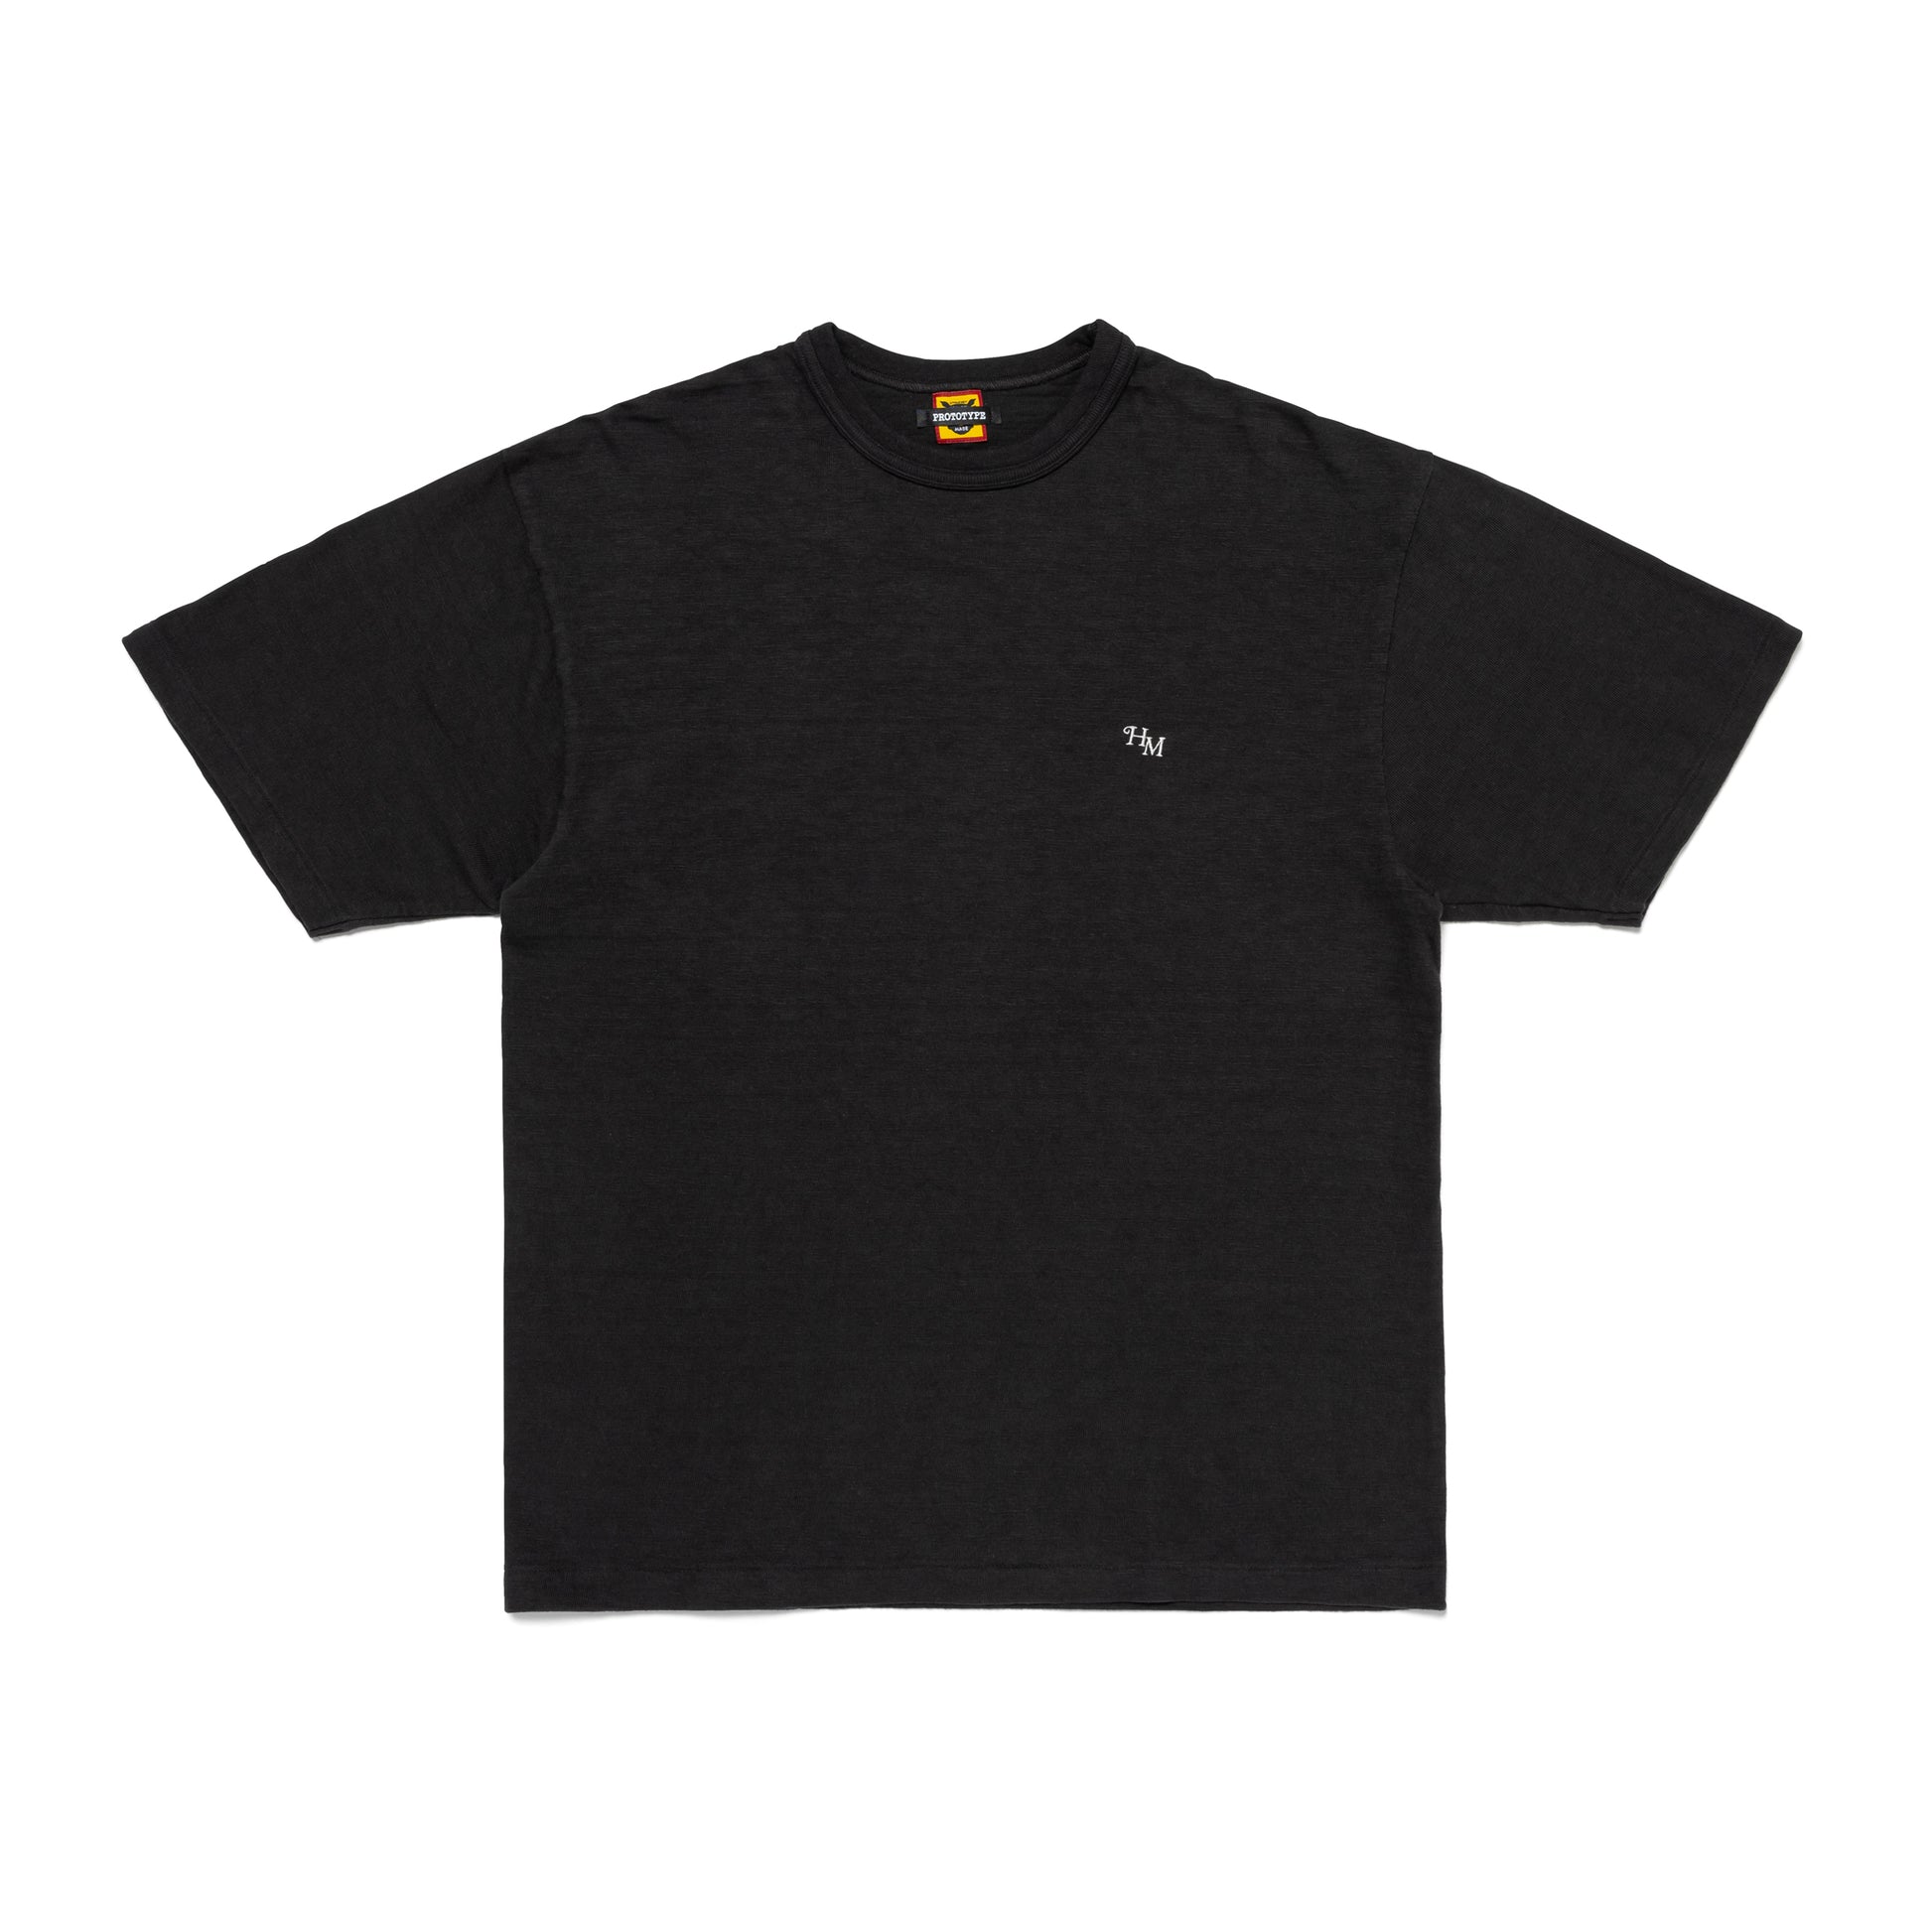 HUMAN MADE EMBROIDERY T-SHIRT BK-A